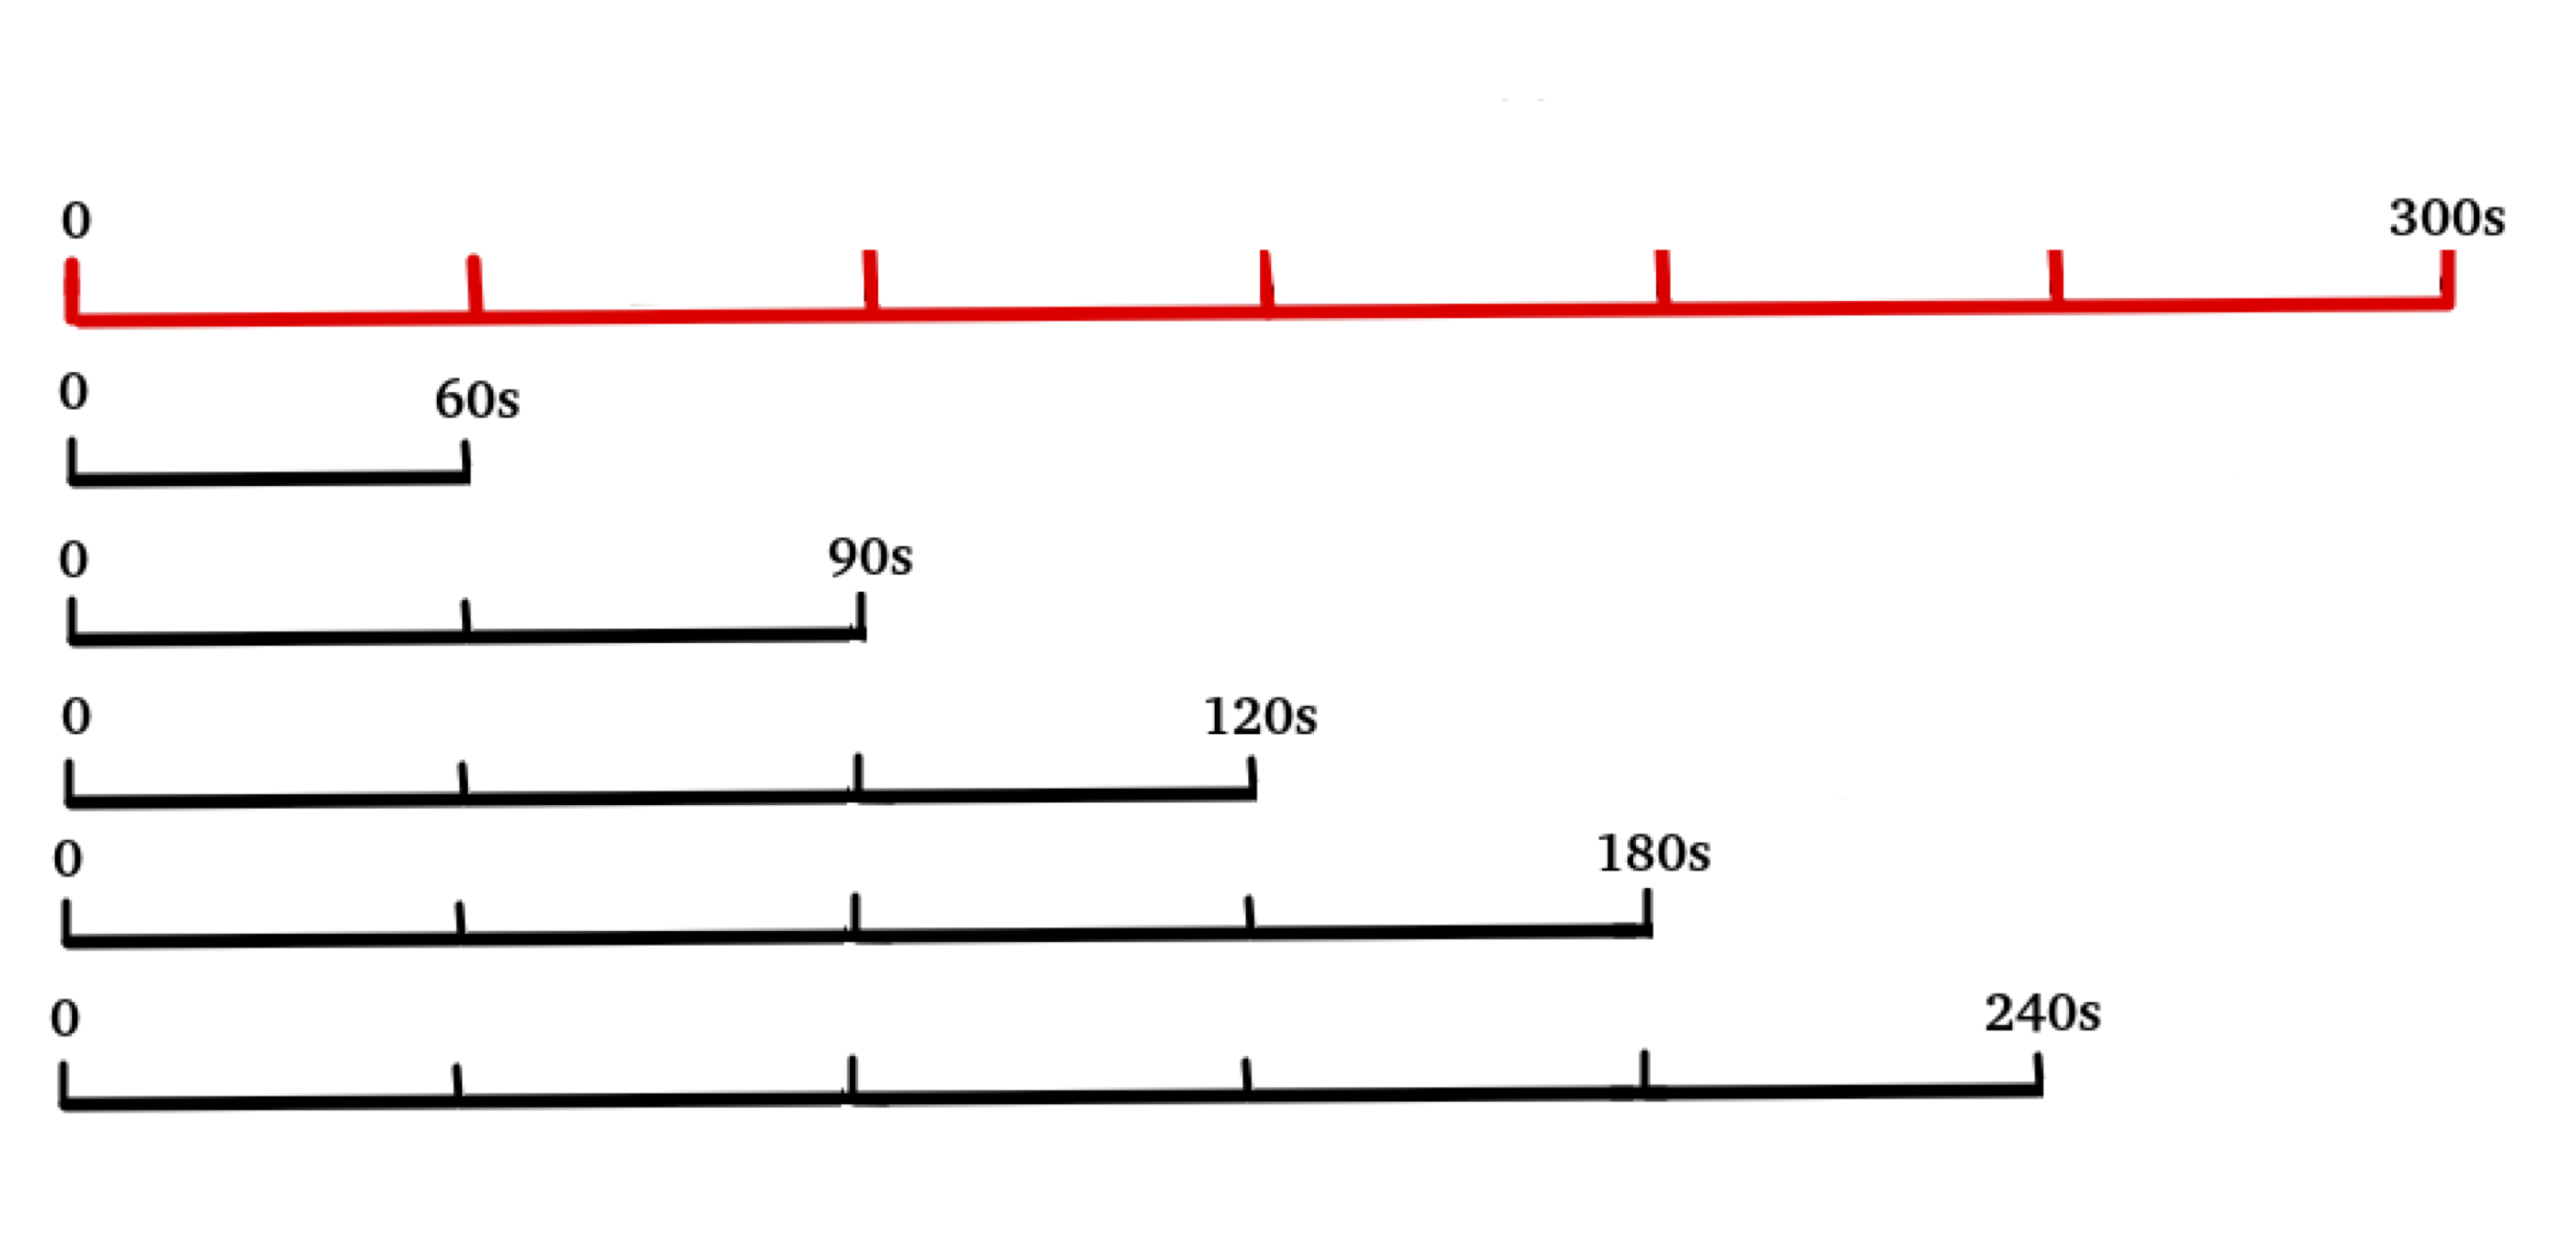 RR series graphic representation with different time lengths in seconds starting from the beginning. The series of 300s corresponds to the Gold Standard.